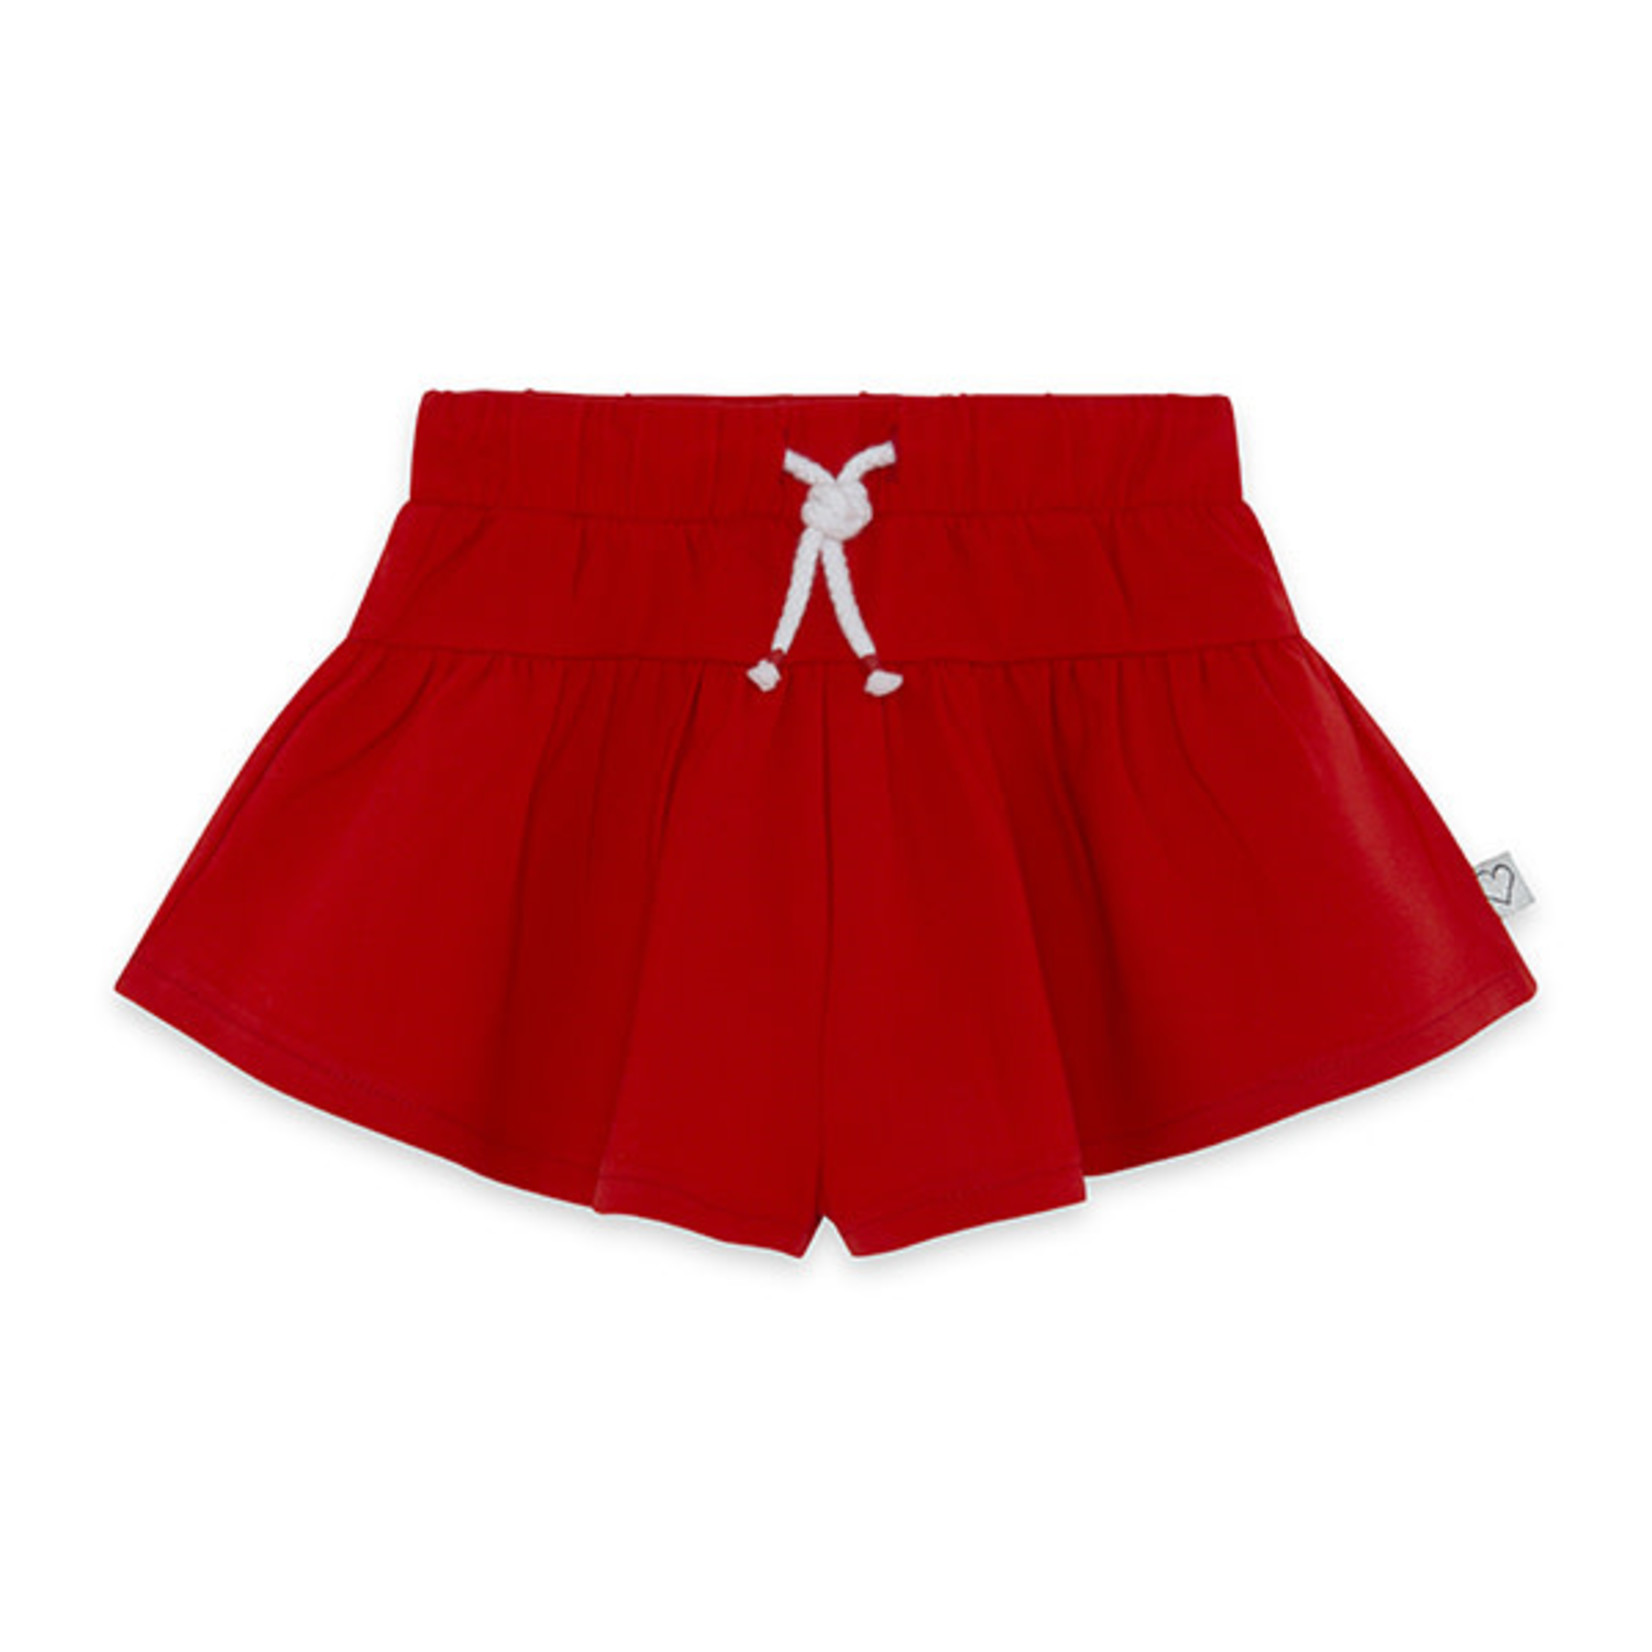 TucTuc TUC TUC - Red jersey shorts with drawstring waist 'Basicos'